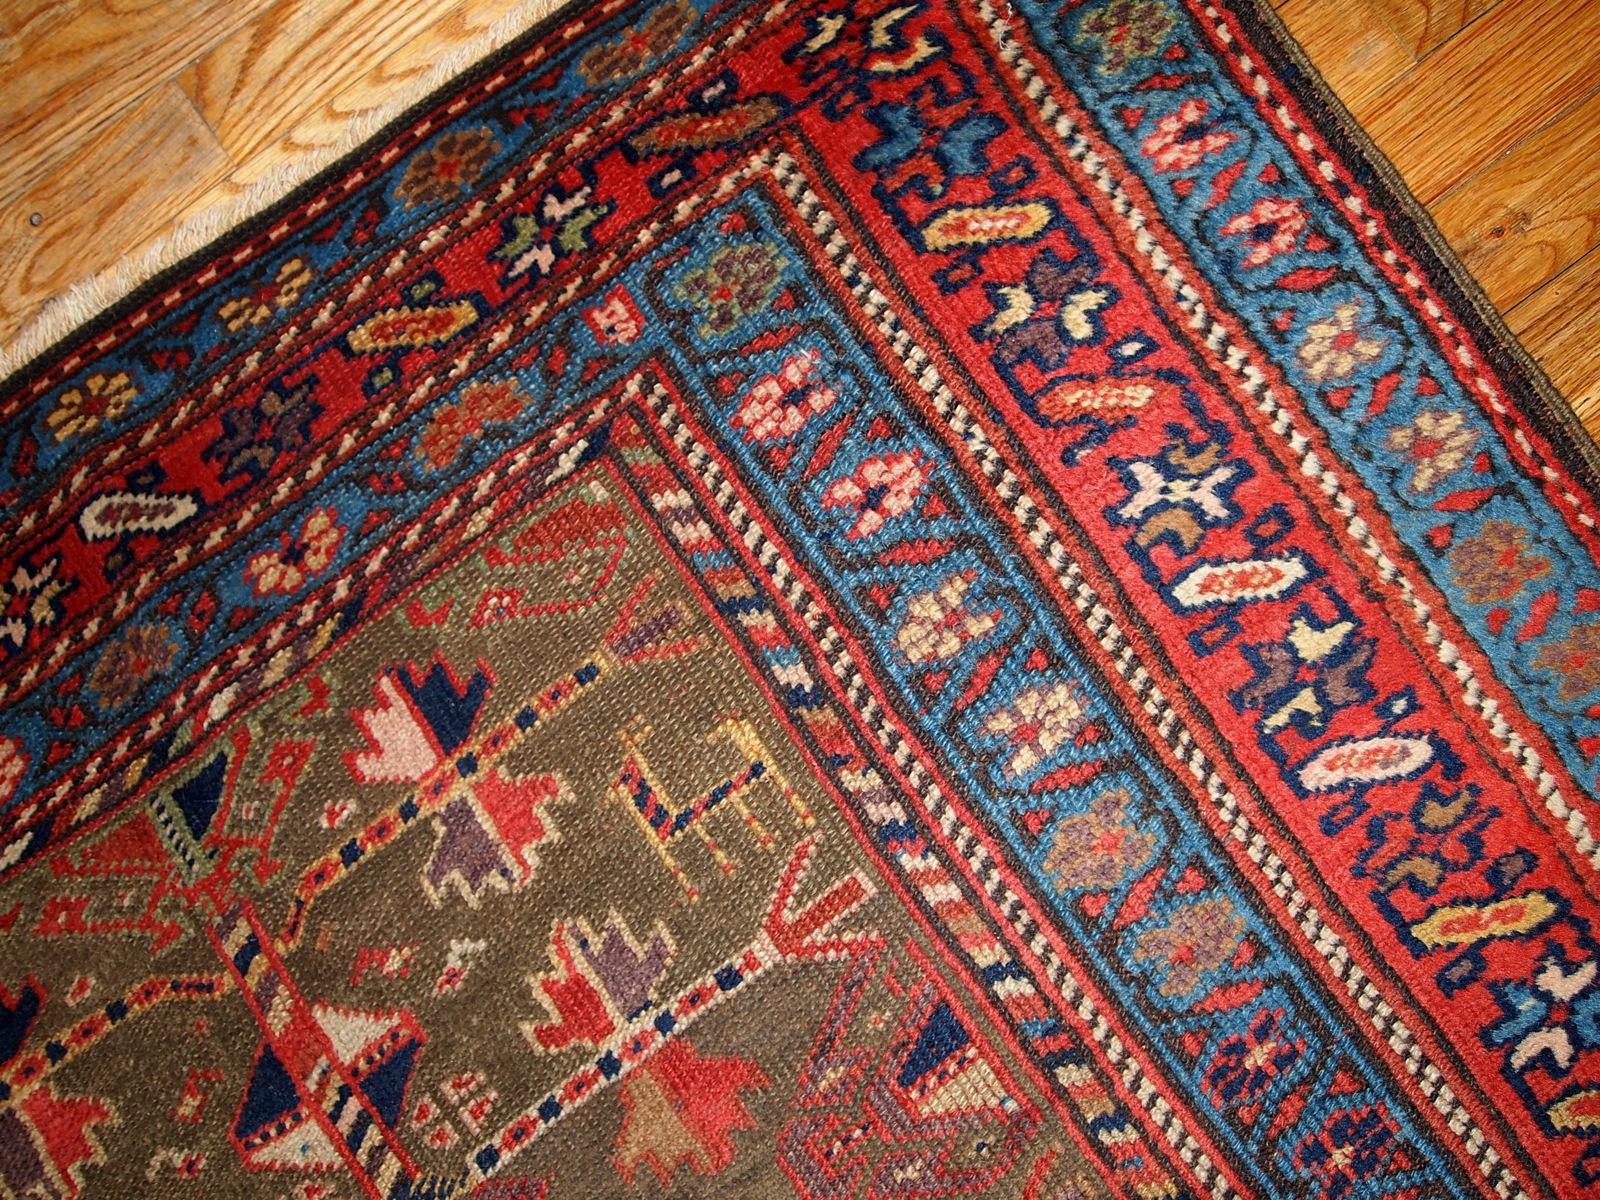 Antique Kurdish style rug in swampy green, red and blue colors. This rug is from the end of 19th century in good condition. Measures: 4' x 7.6' (122cm x 231cm).